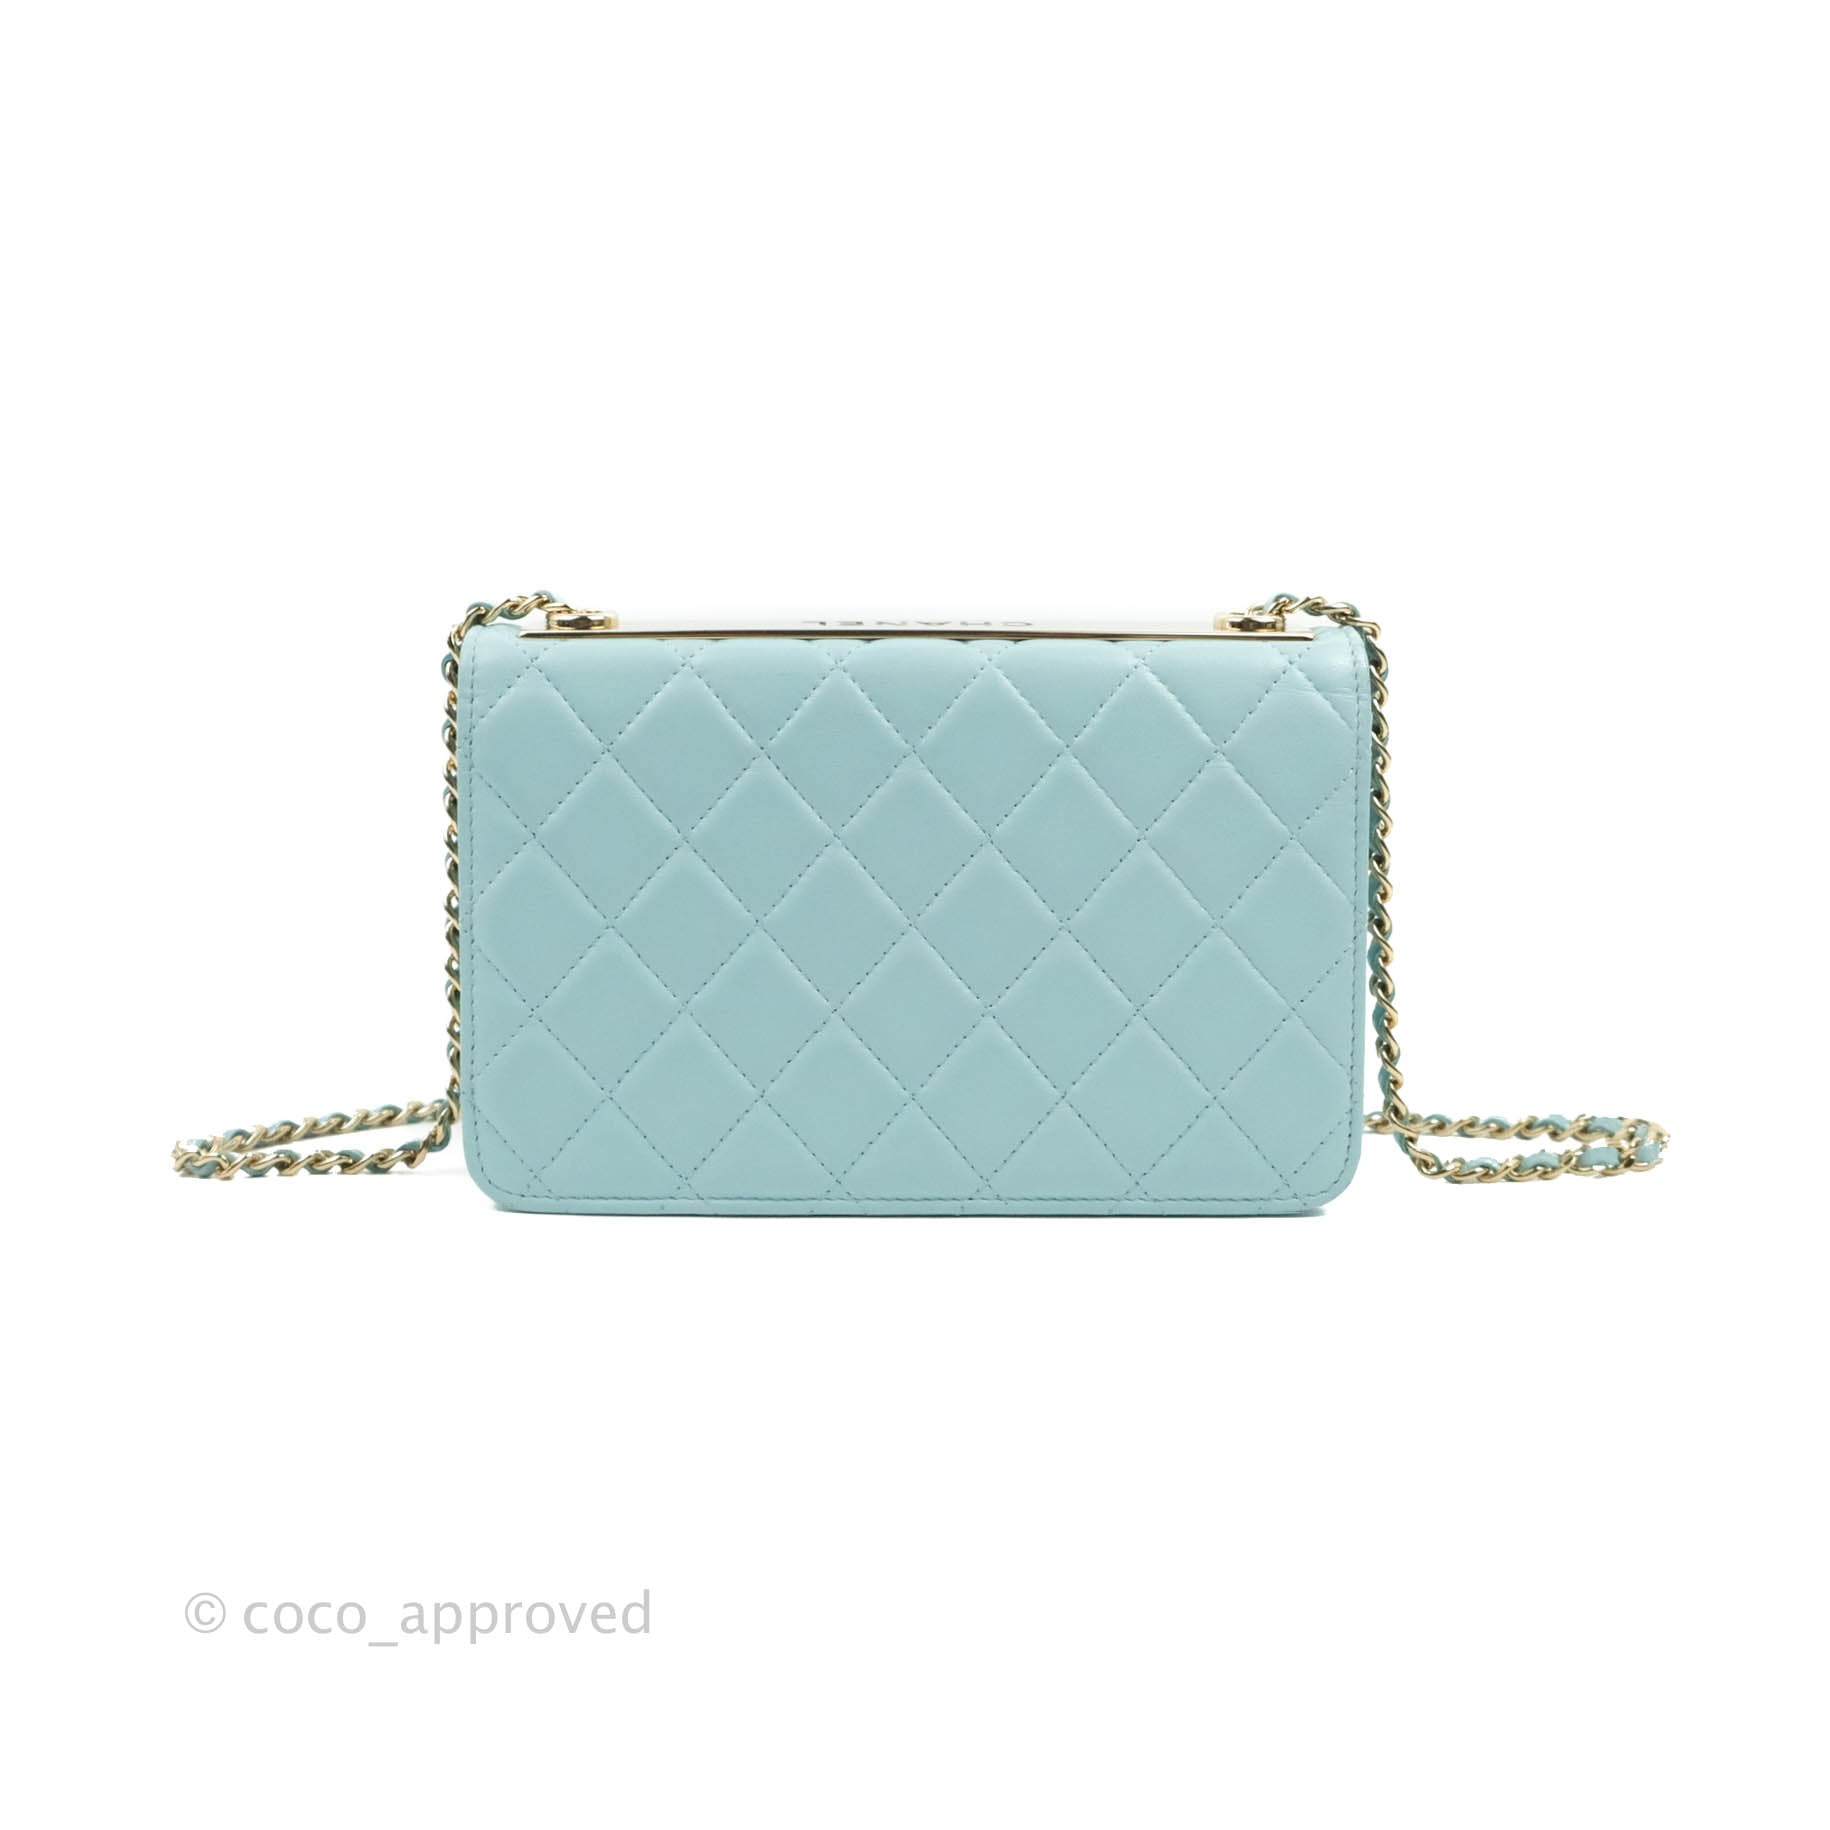 Chanel Light Blue Quilted Lambskin Leather Classic WOC Clutch Bag